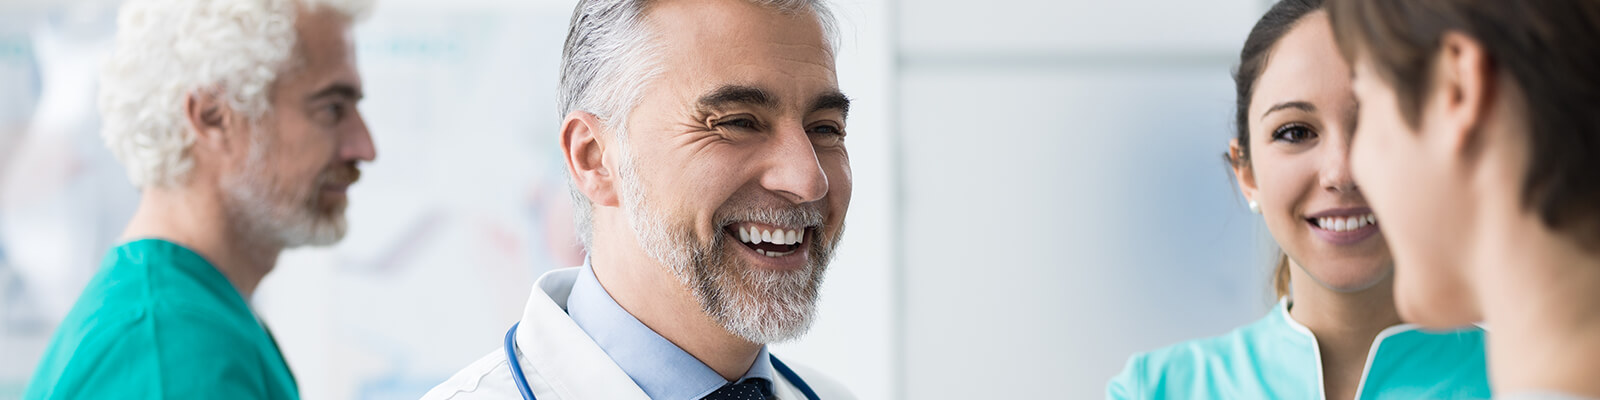 Achieving Bright Smiles: Boston Dental in Abu Dhabi Offers Premier Dental Care Services